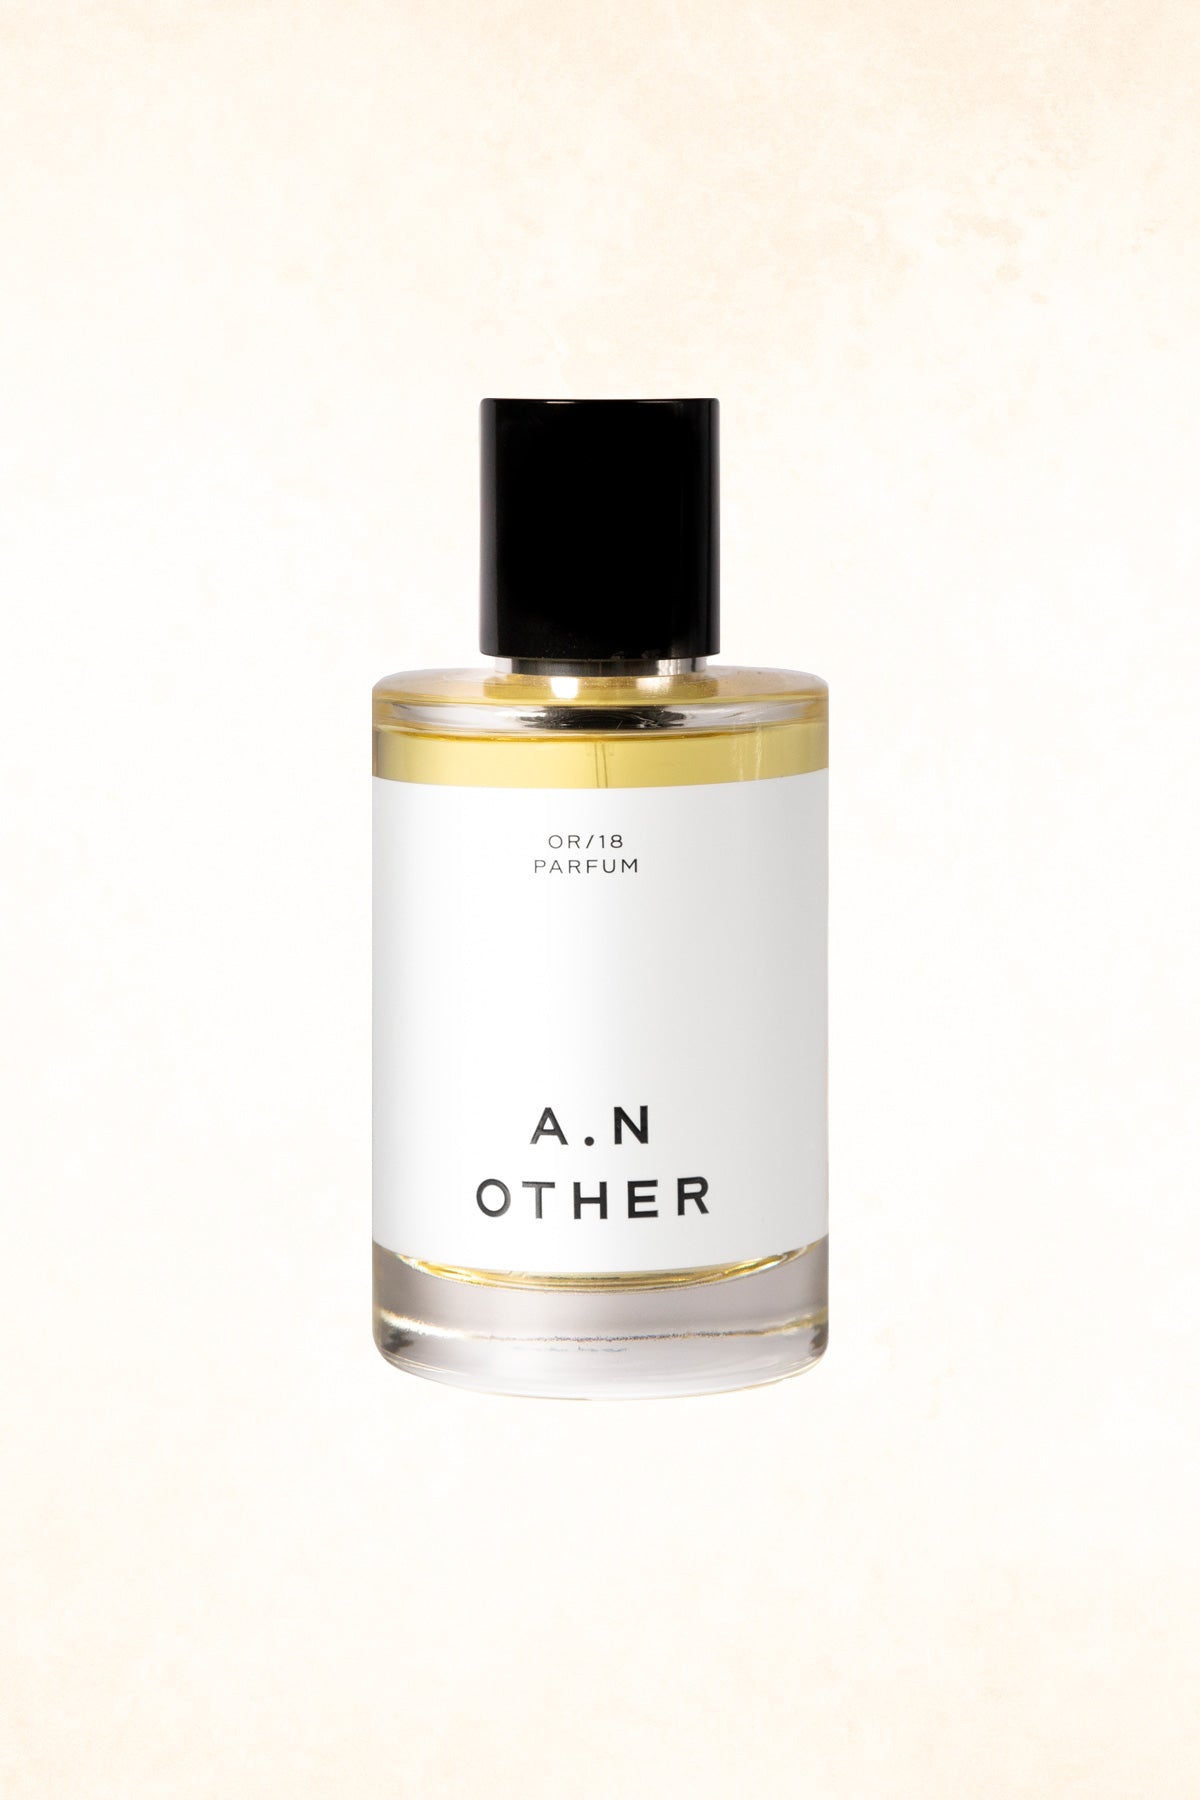 A.N OTHER – OR/2018 Parfum - 100 ml